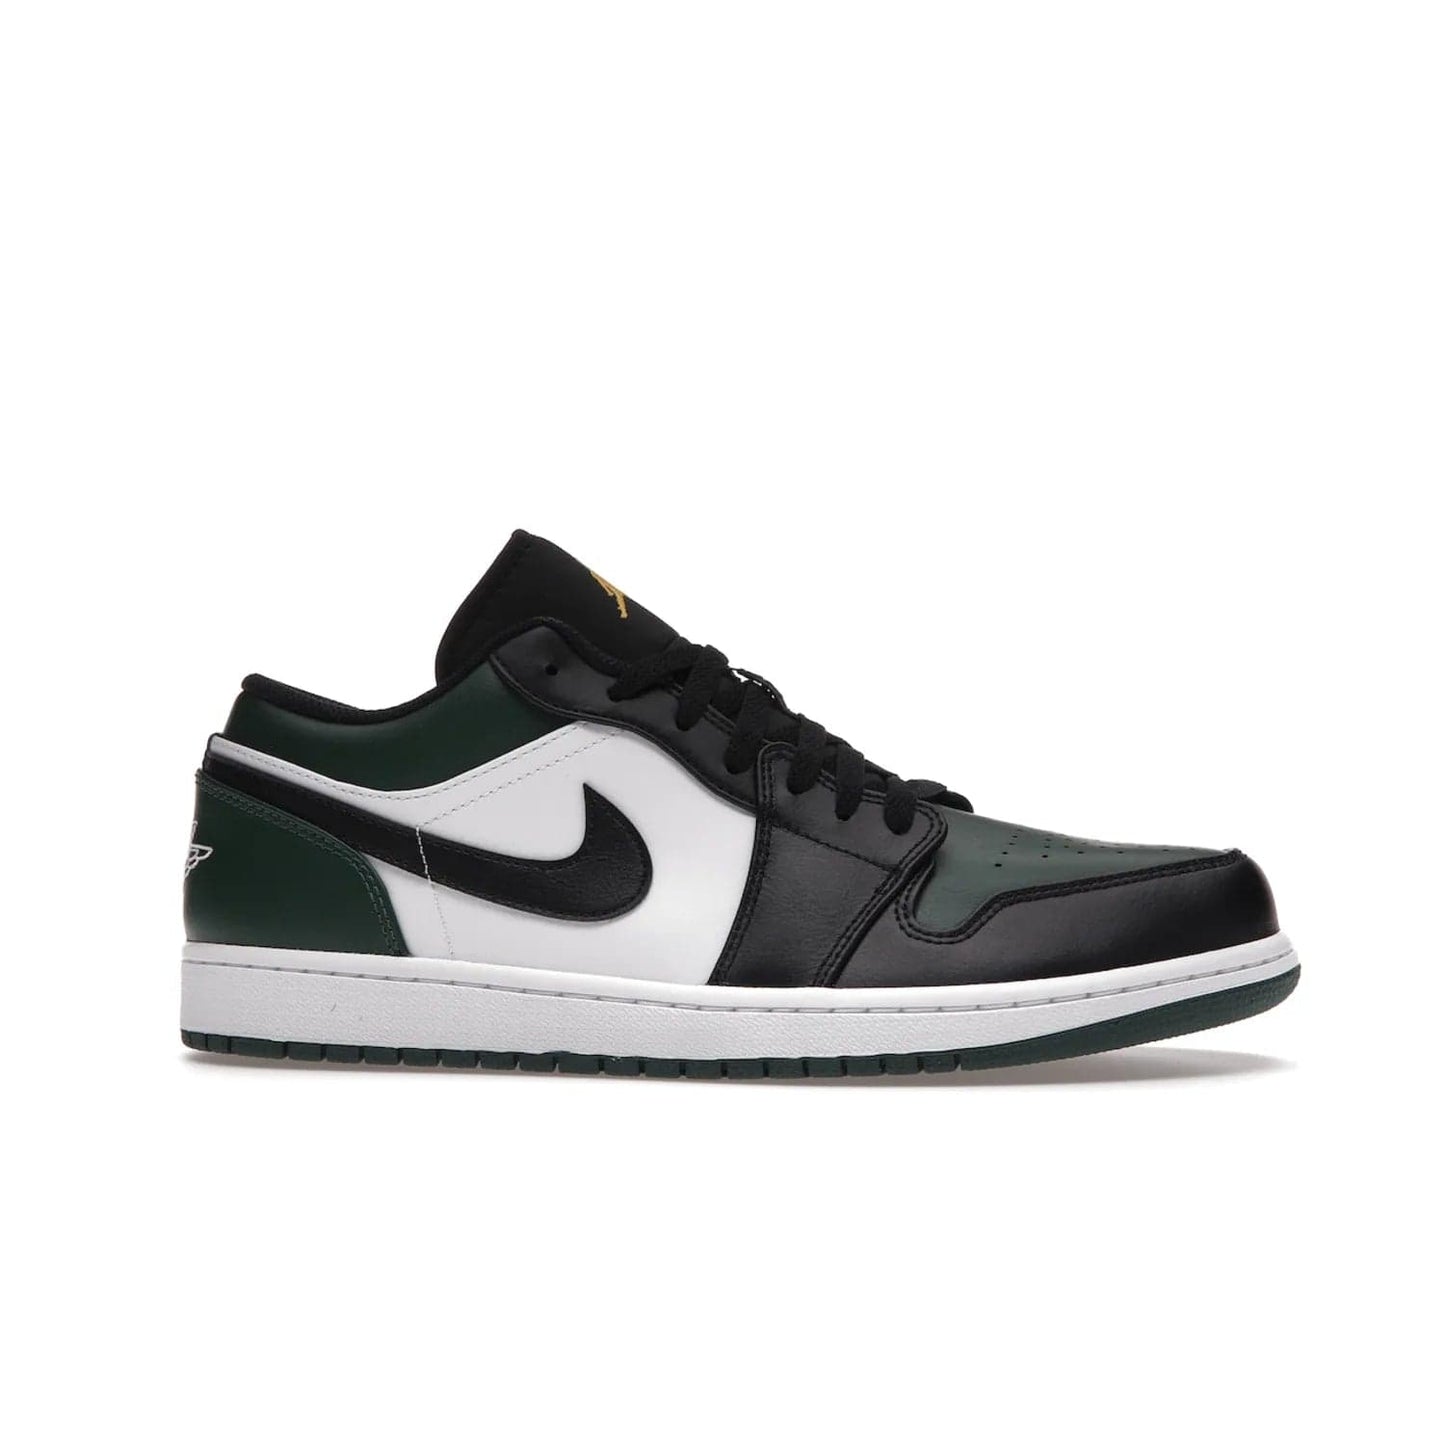 Jordan 1 Low Green Toe - Image 2 - Only at www.BallersClubKickz.com - The Jordan 1 Low Green Toe features white, black and Noble Green leather with black Swoosh. Get the classic Bred Toe-inspired color blocking with green perforated toe box. White and green Air sole completes the design. Released in October 2021 at only $100. Grab your pair now!